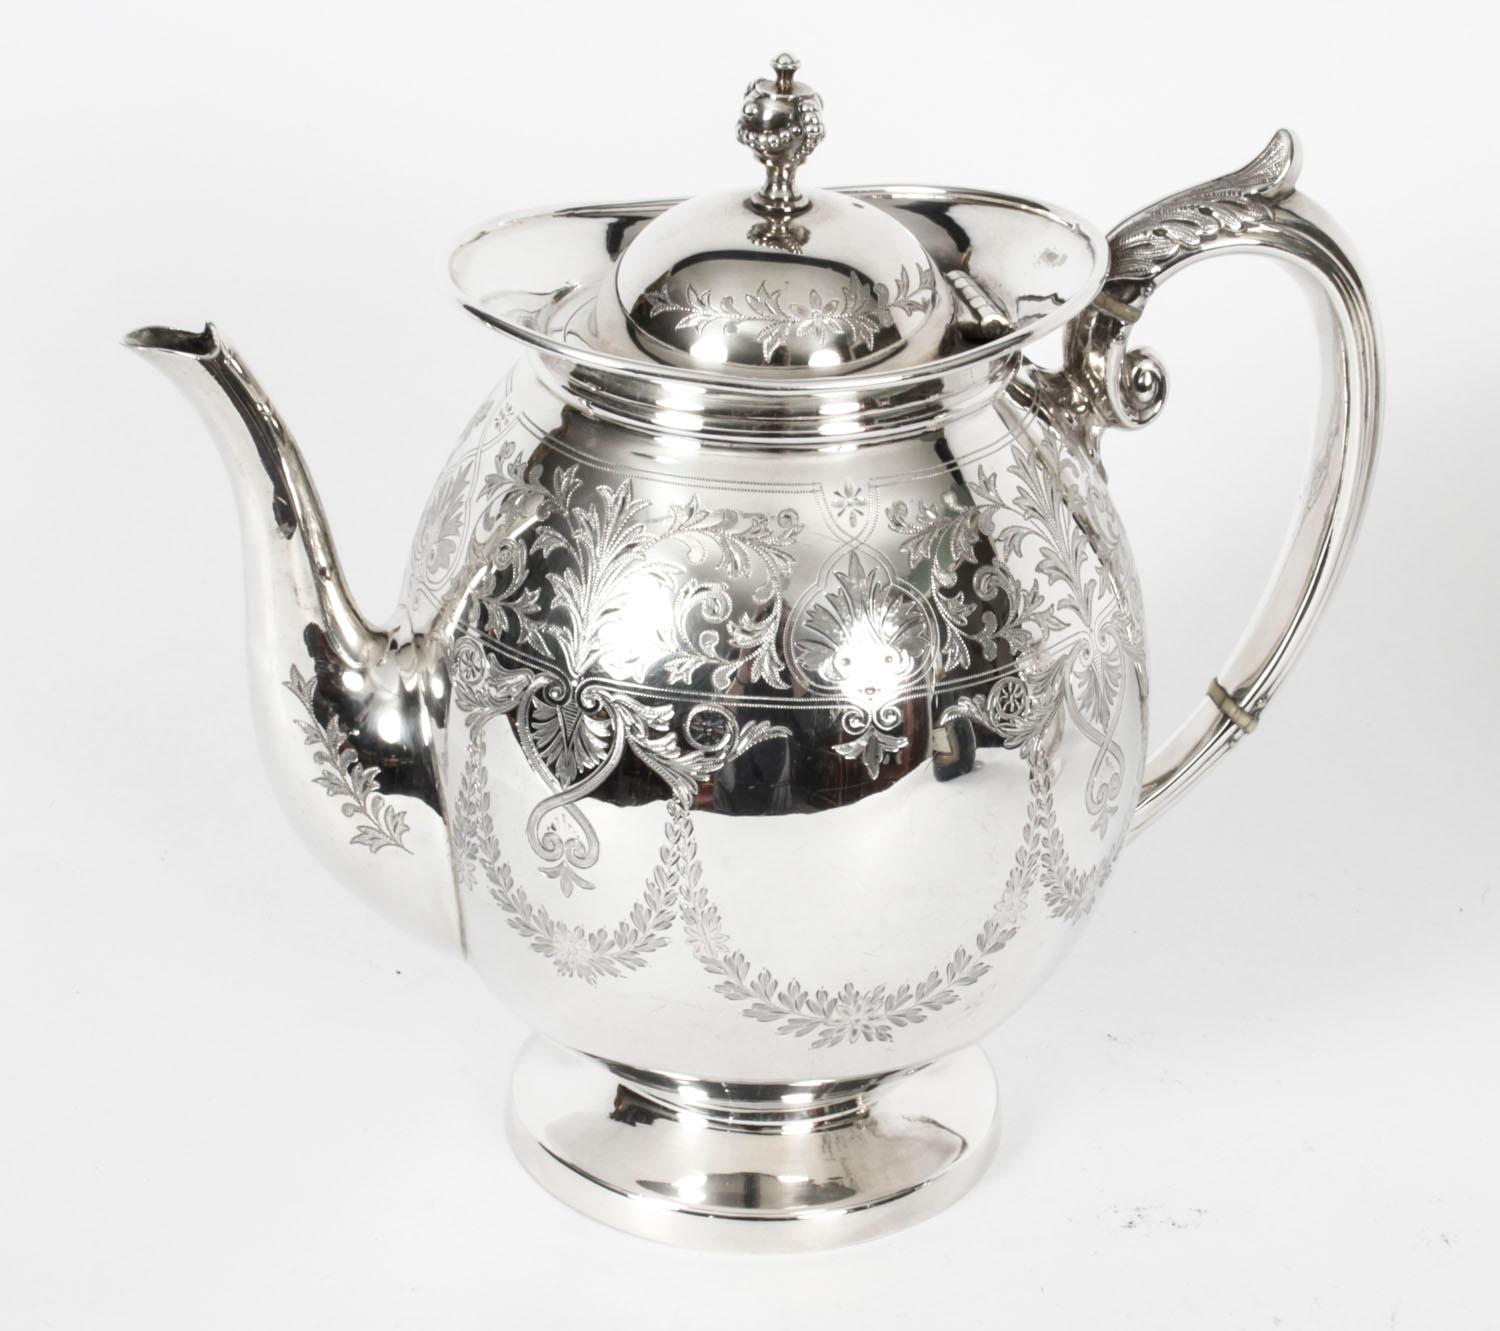 Late 19th Century Antique Silver Plated Three Piece Tea Set Atkin Brothers, 19th Century